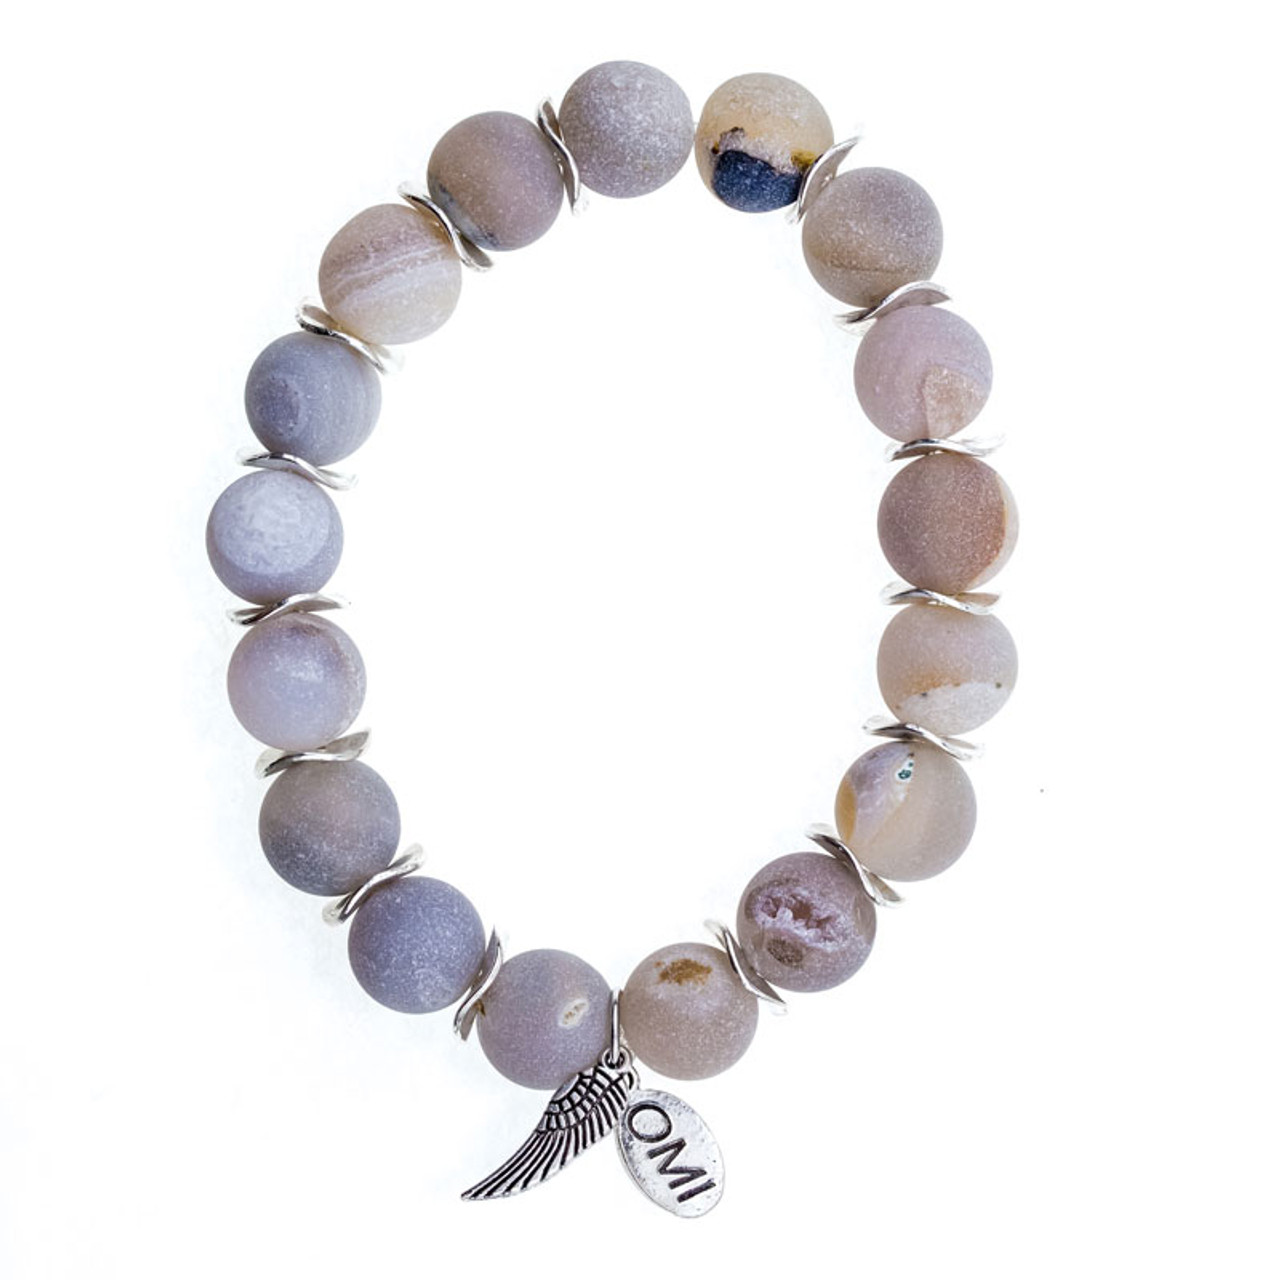 Light Grey Matte Druzy Stone Bead Bracelet with Silver Spacers - 10mm